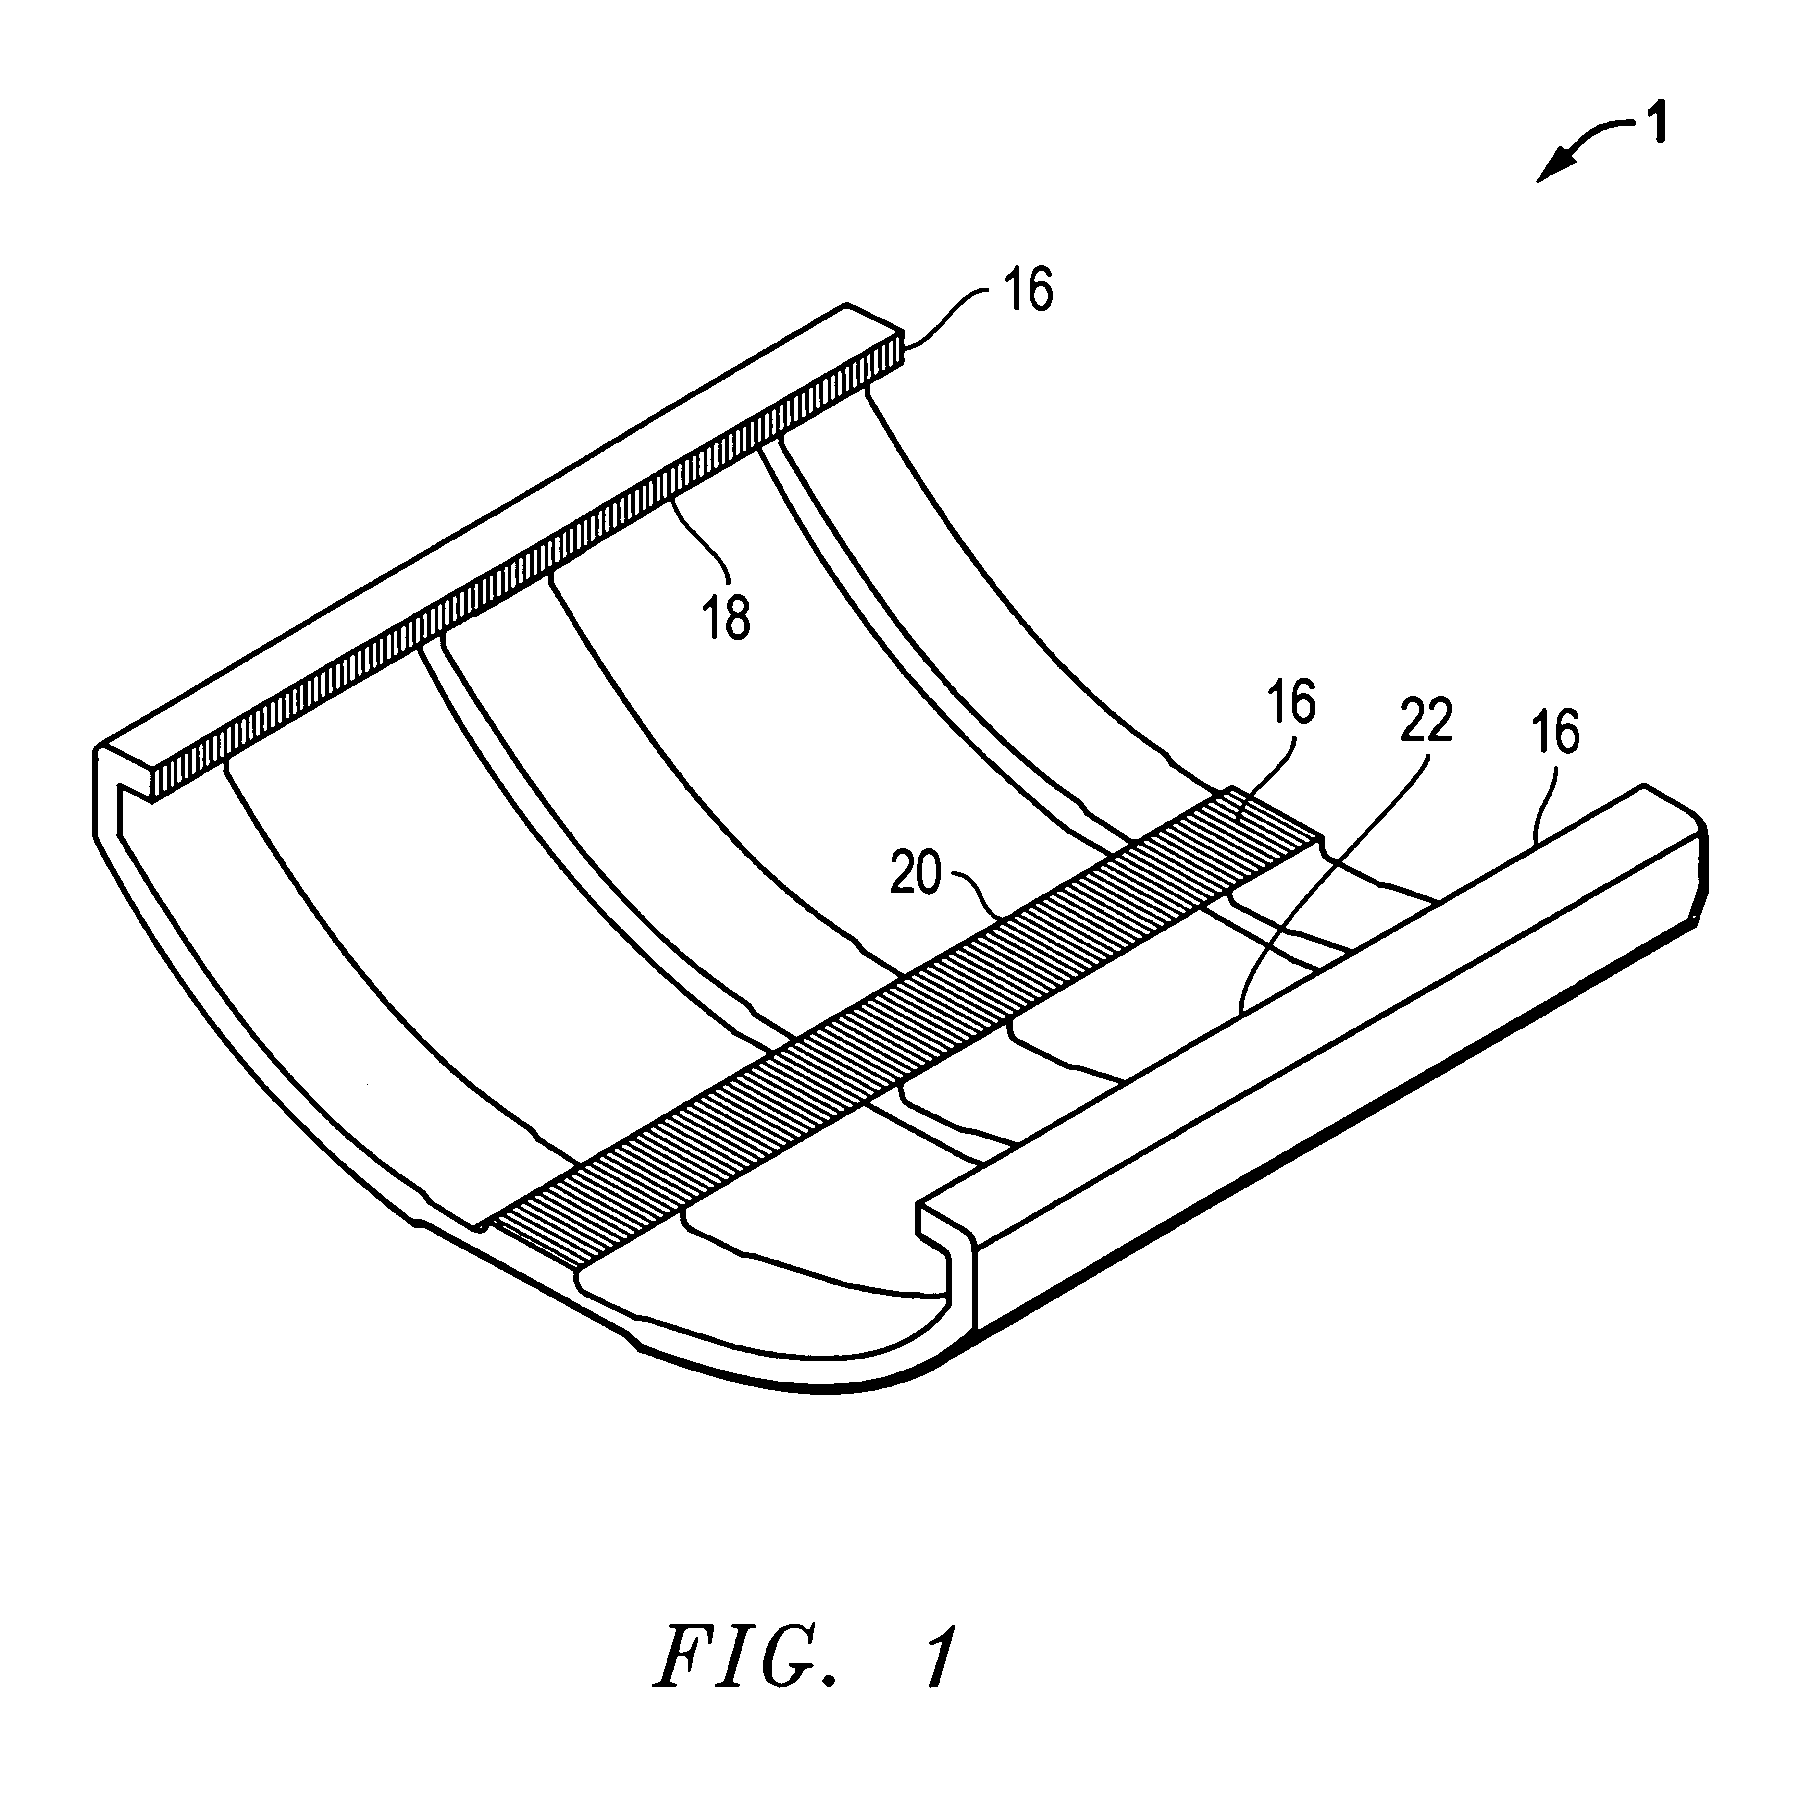 Method for treating semiconductor processing components and components formed thereby